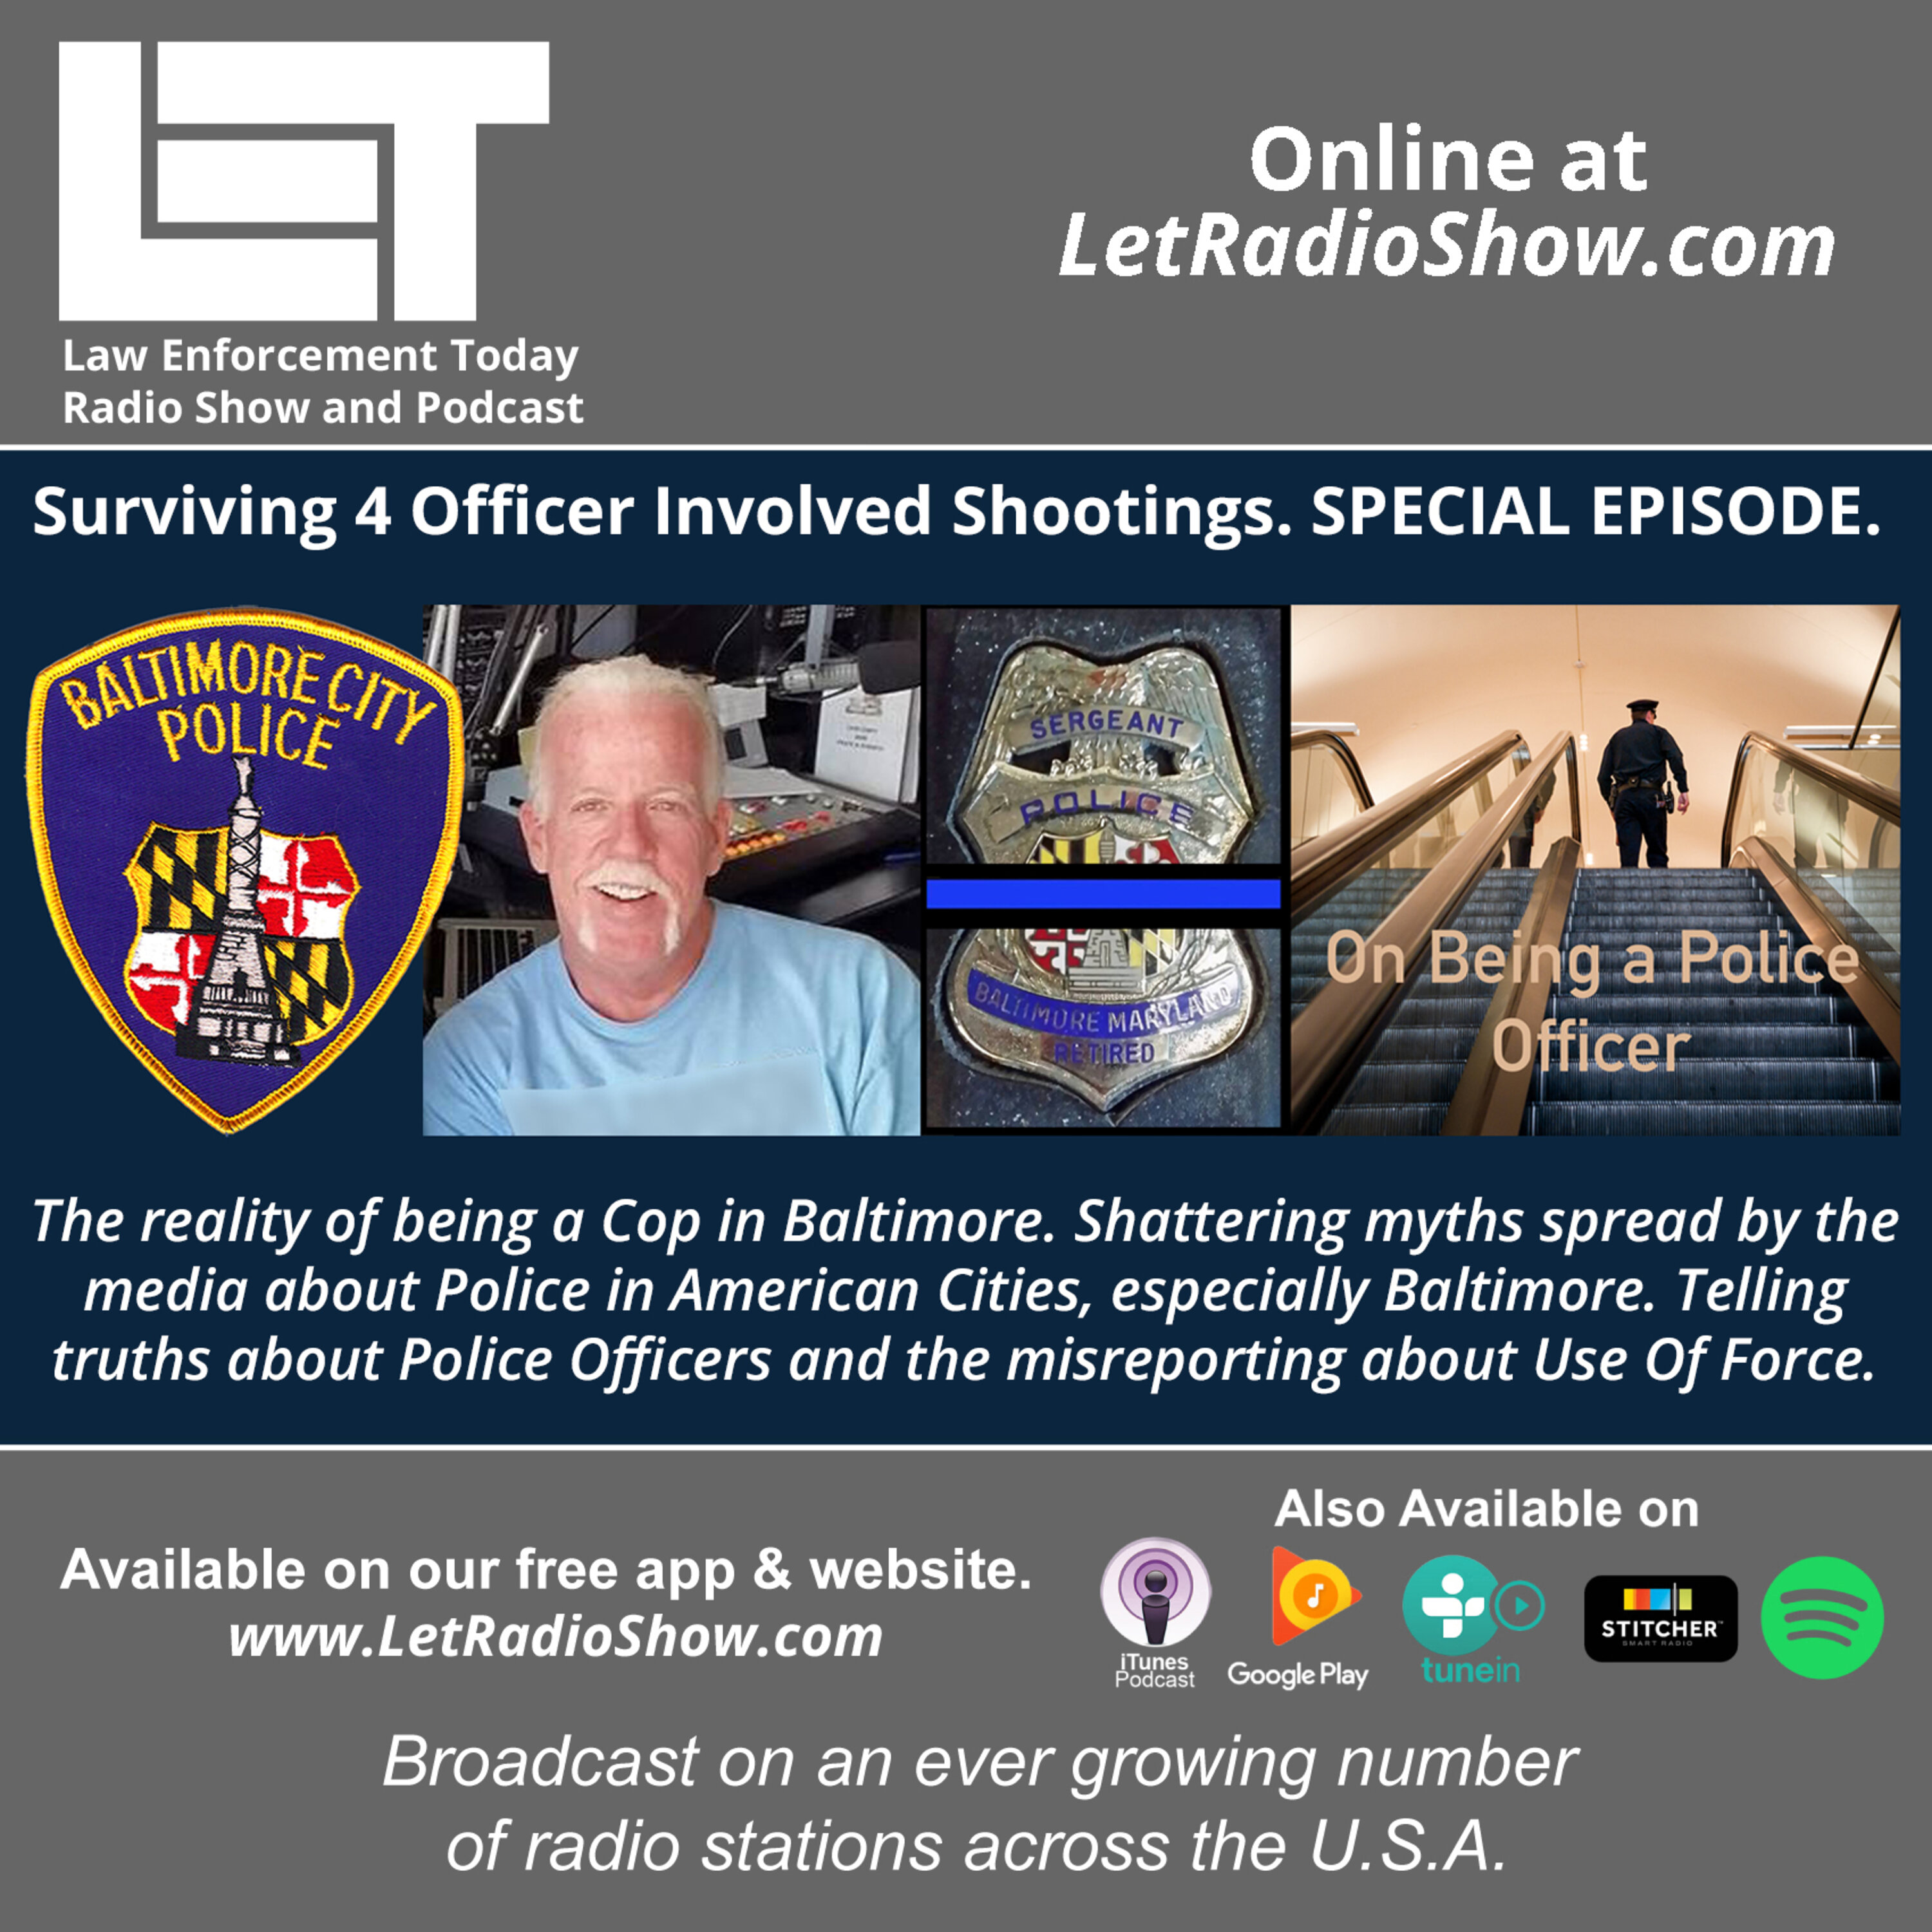 S6E25: Surviving 4 Officer-Involved Shootings. SPECIAL EPISODE.